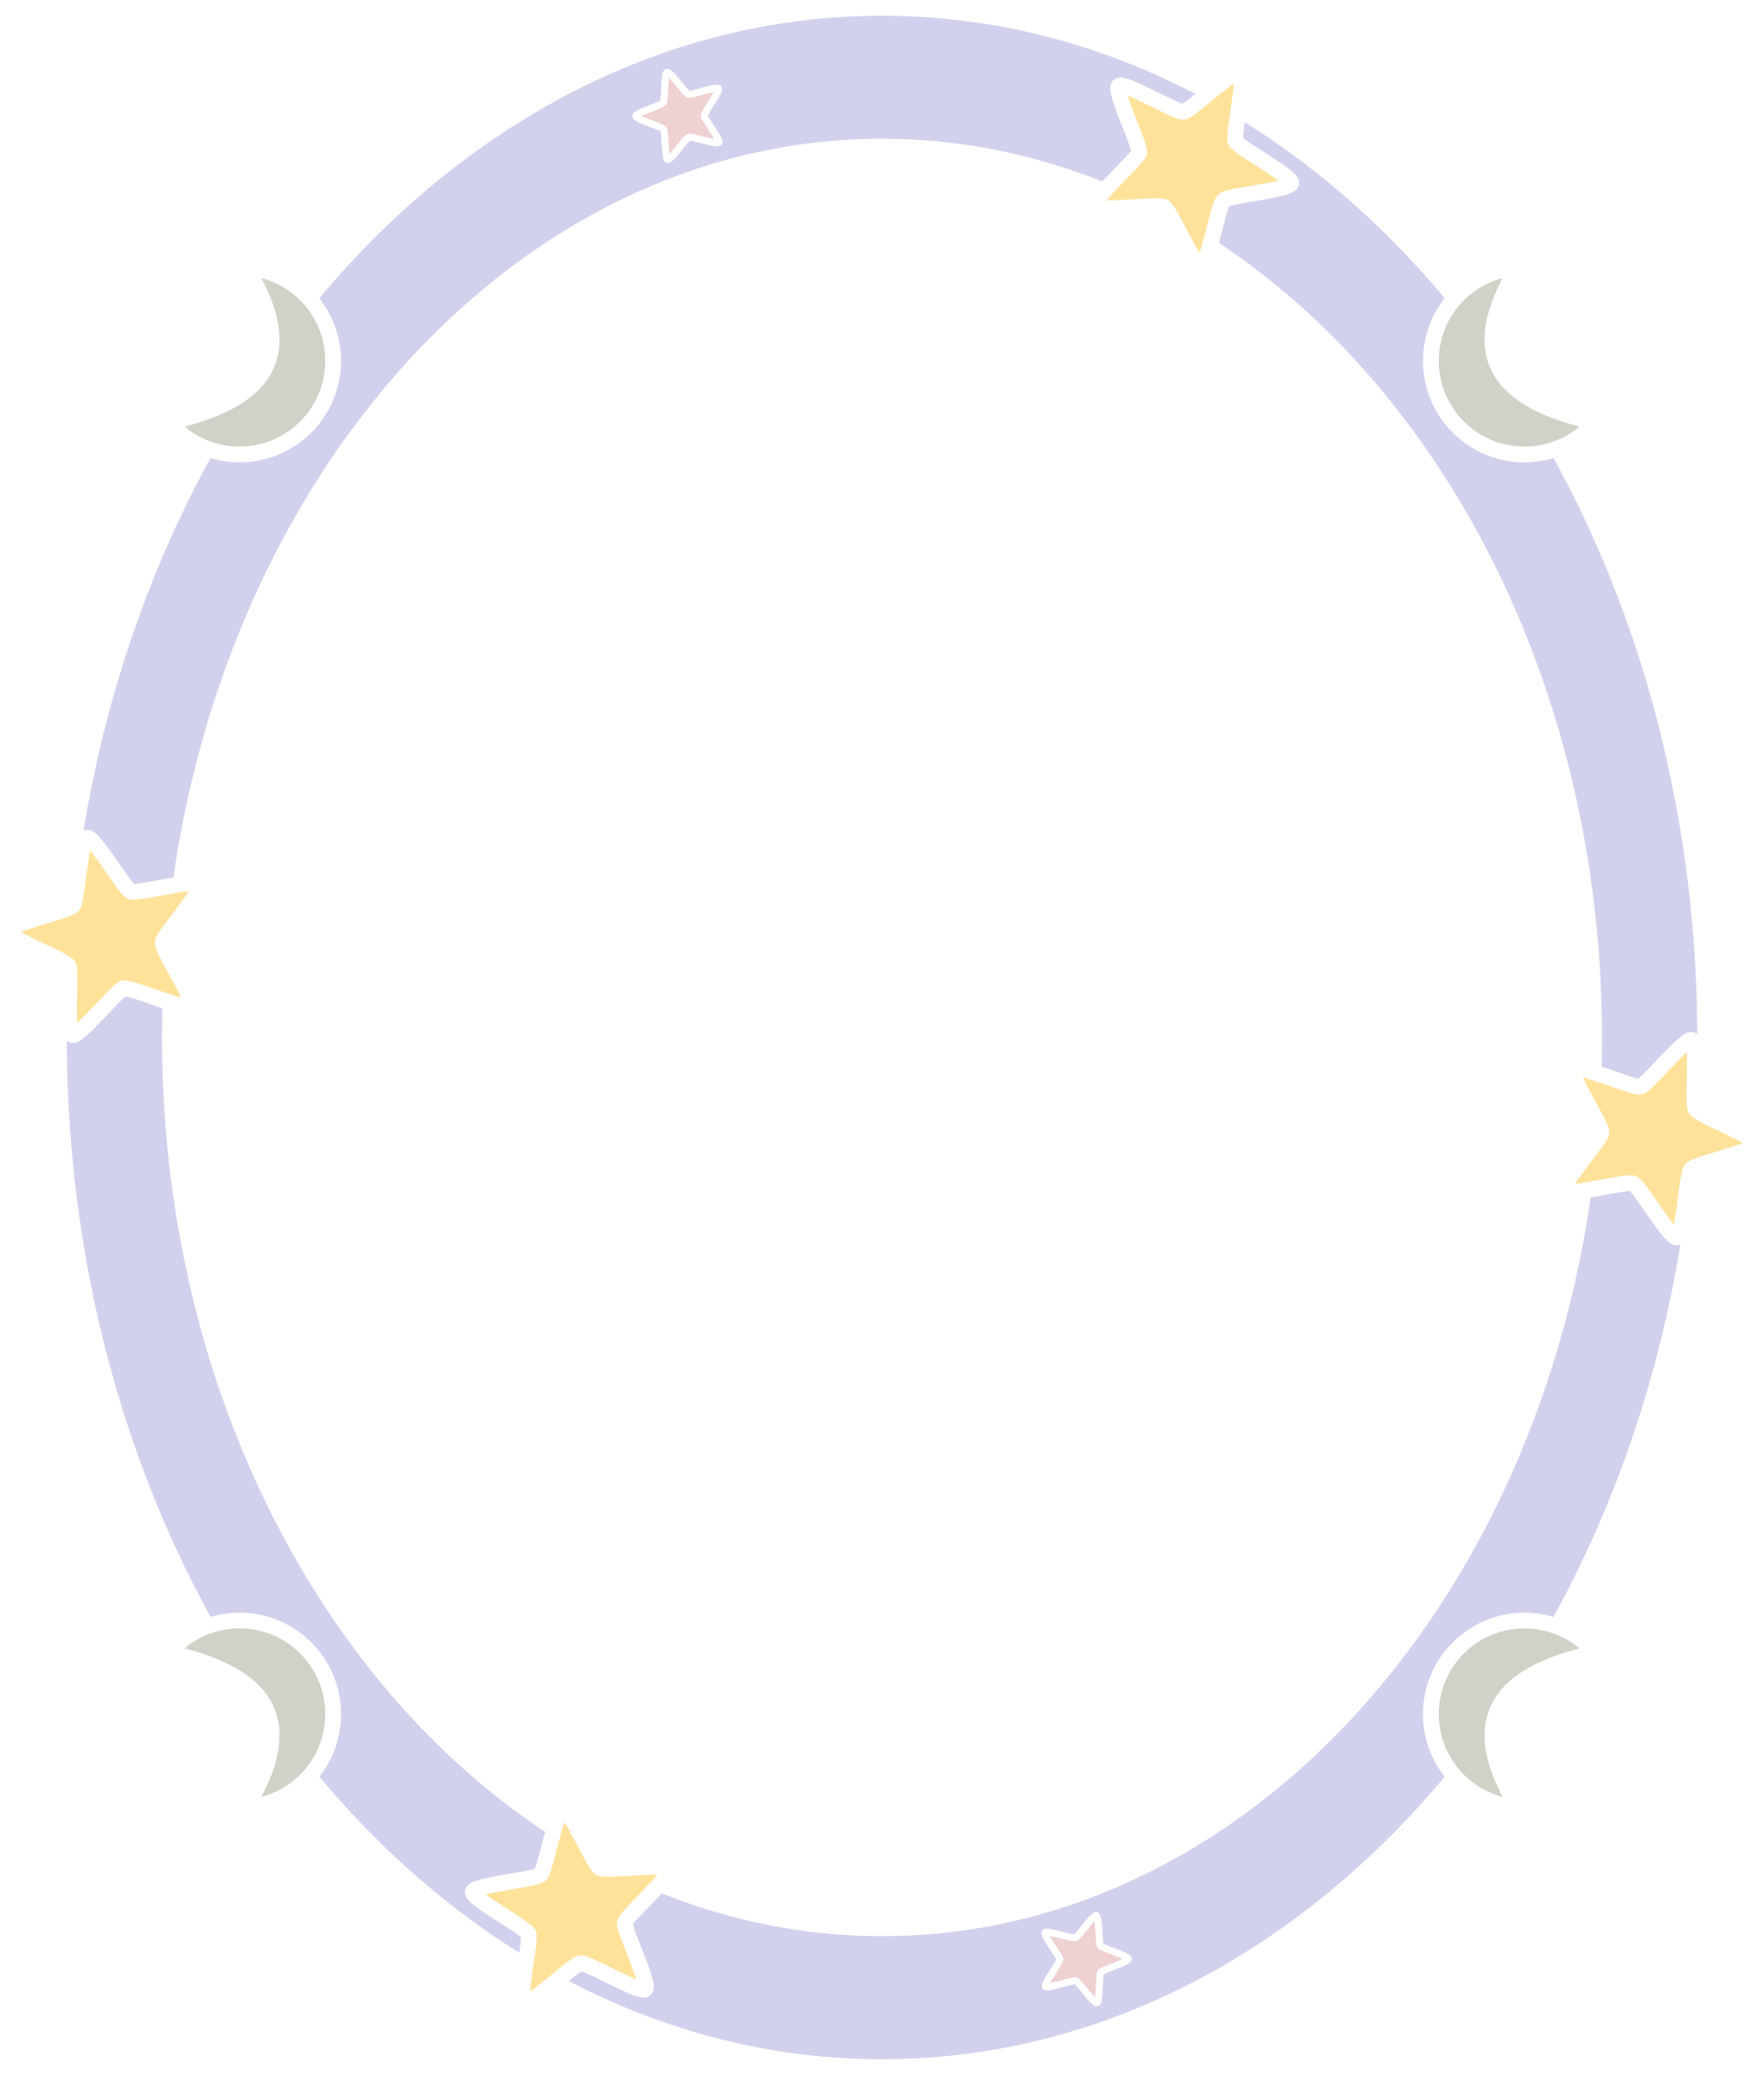 Starry night big image. Moon clipart frame